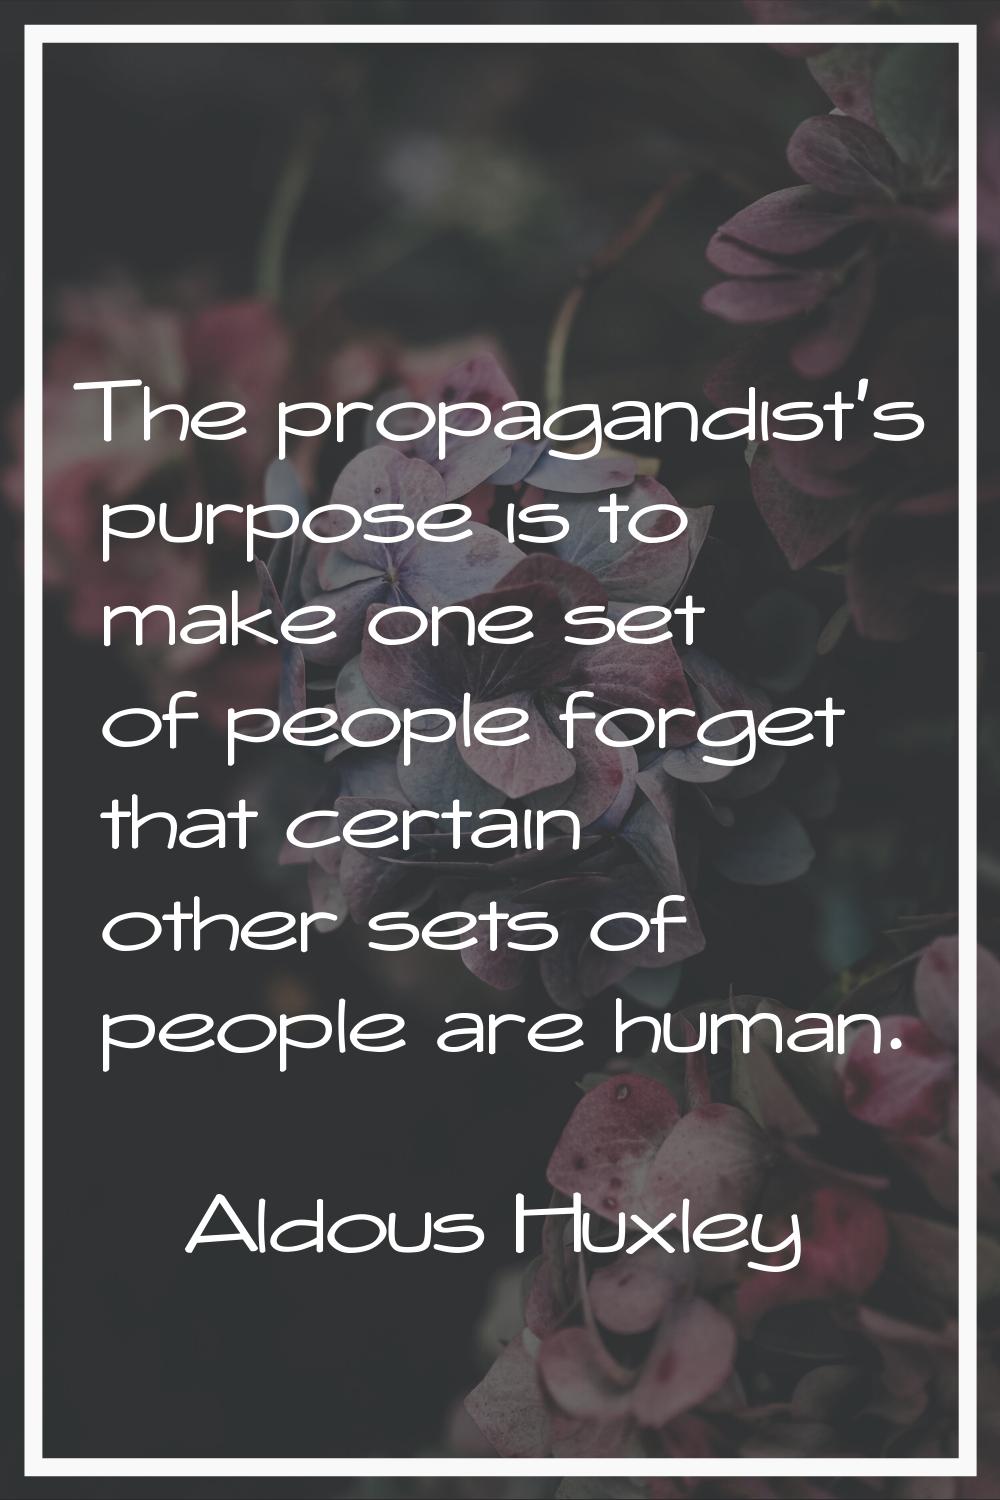 The propagandist's purpose is to make one set of people forget that certain other sets of people ar